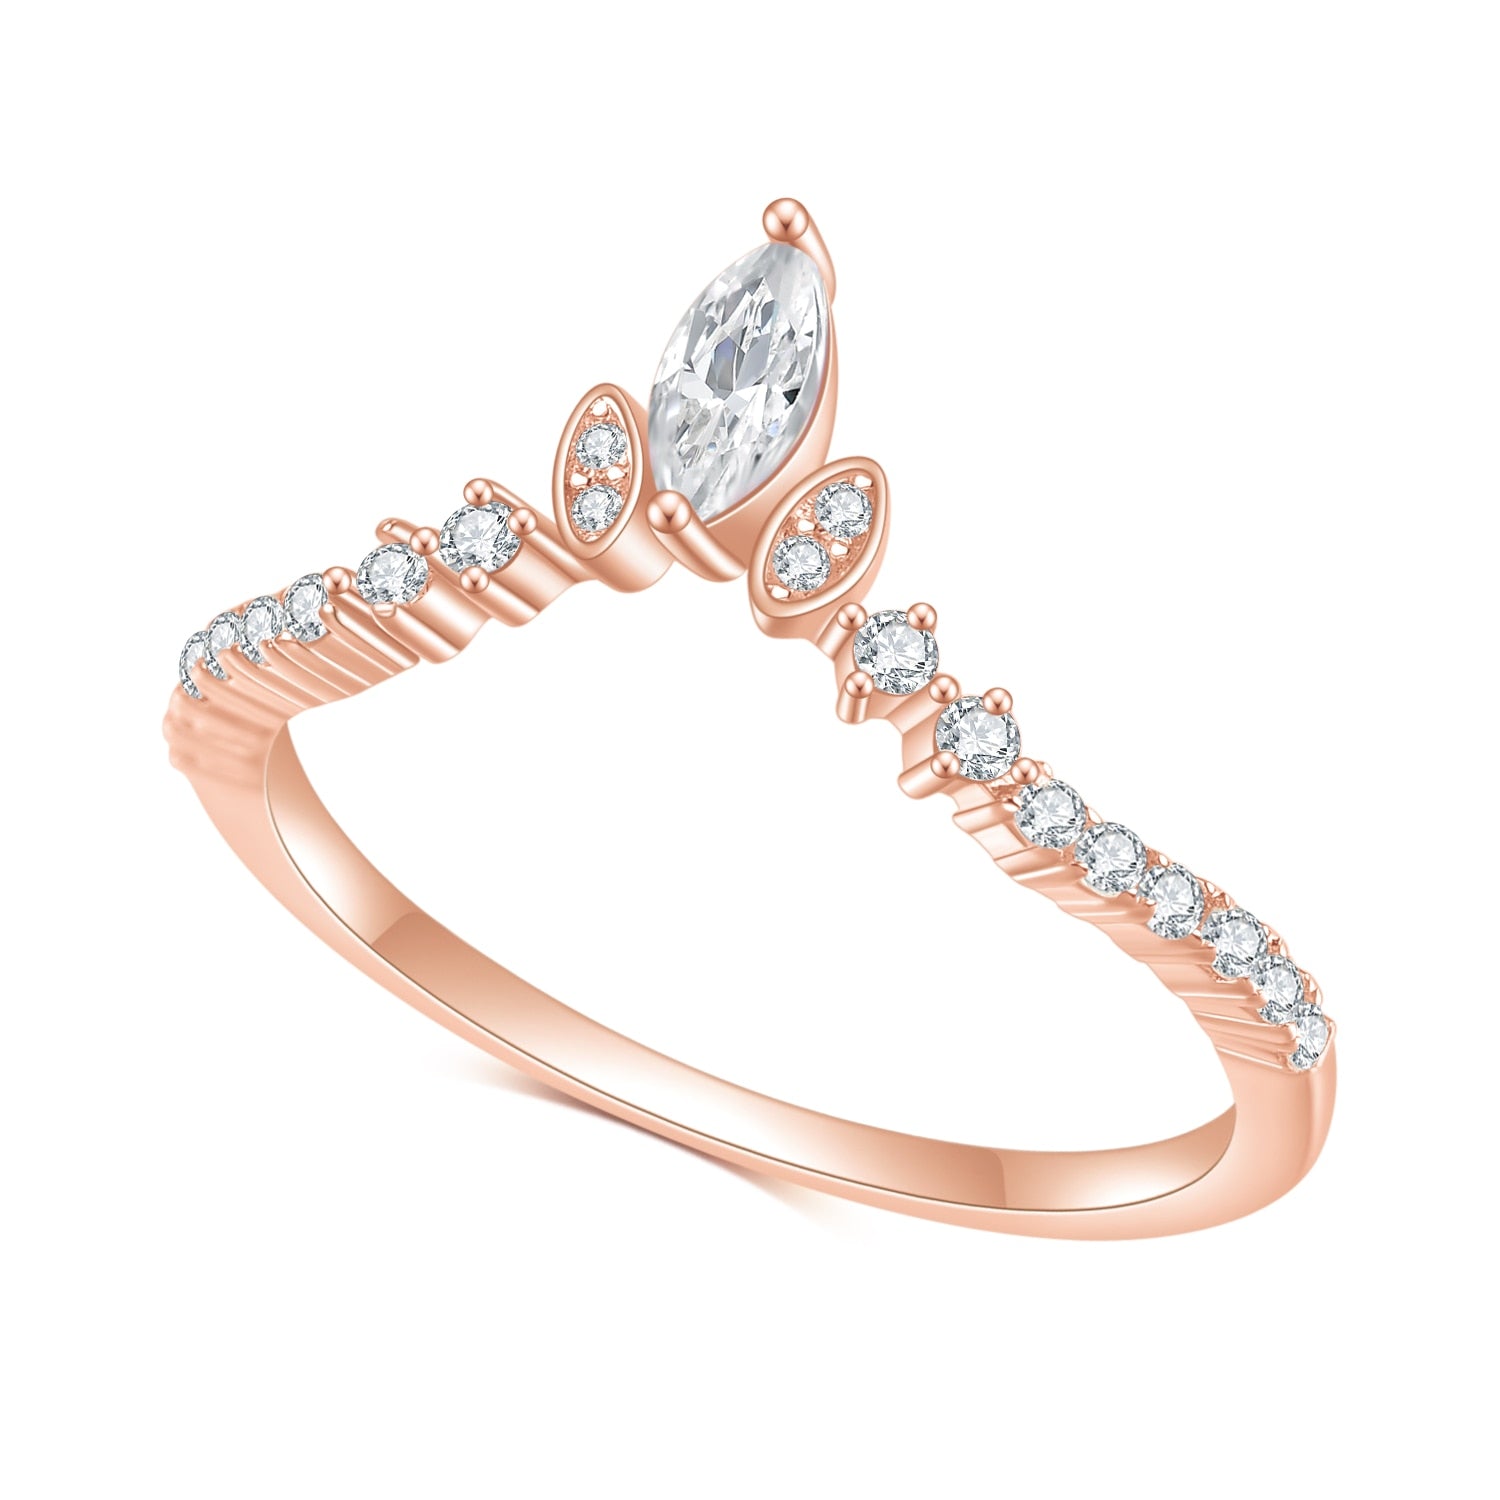 A rose gold chevron style wedding ring set with several small round moissanites set horizontally and two bezel set moissanites and one larger prong set moissanite at the V.